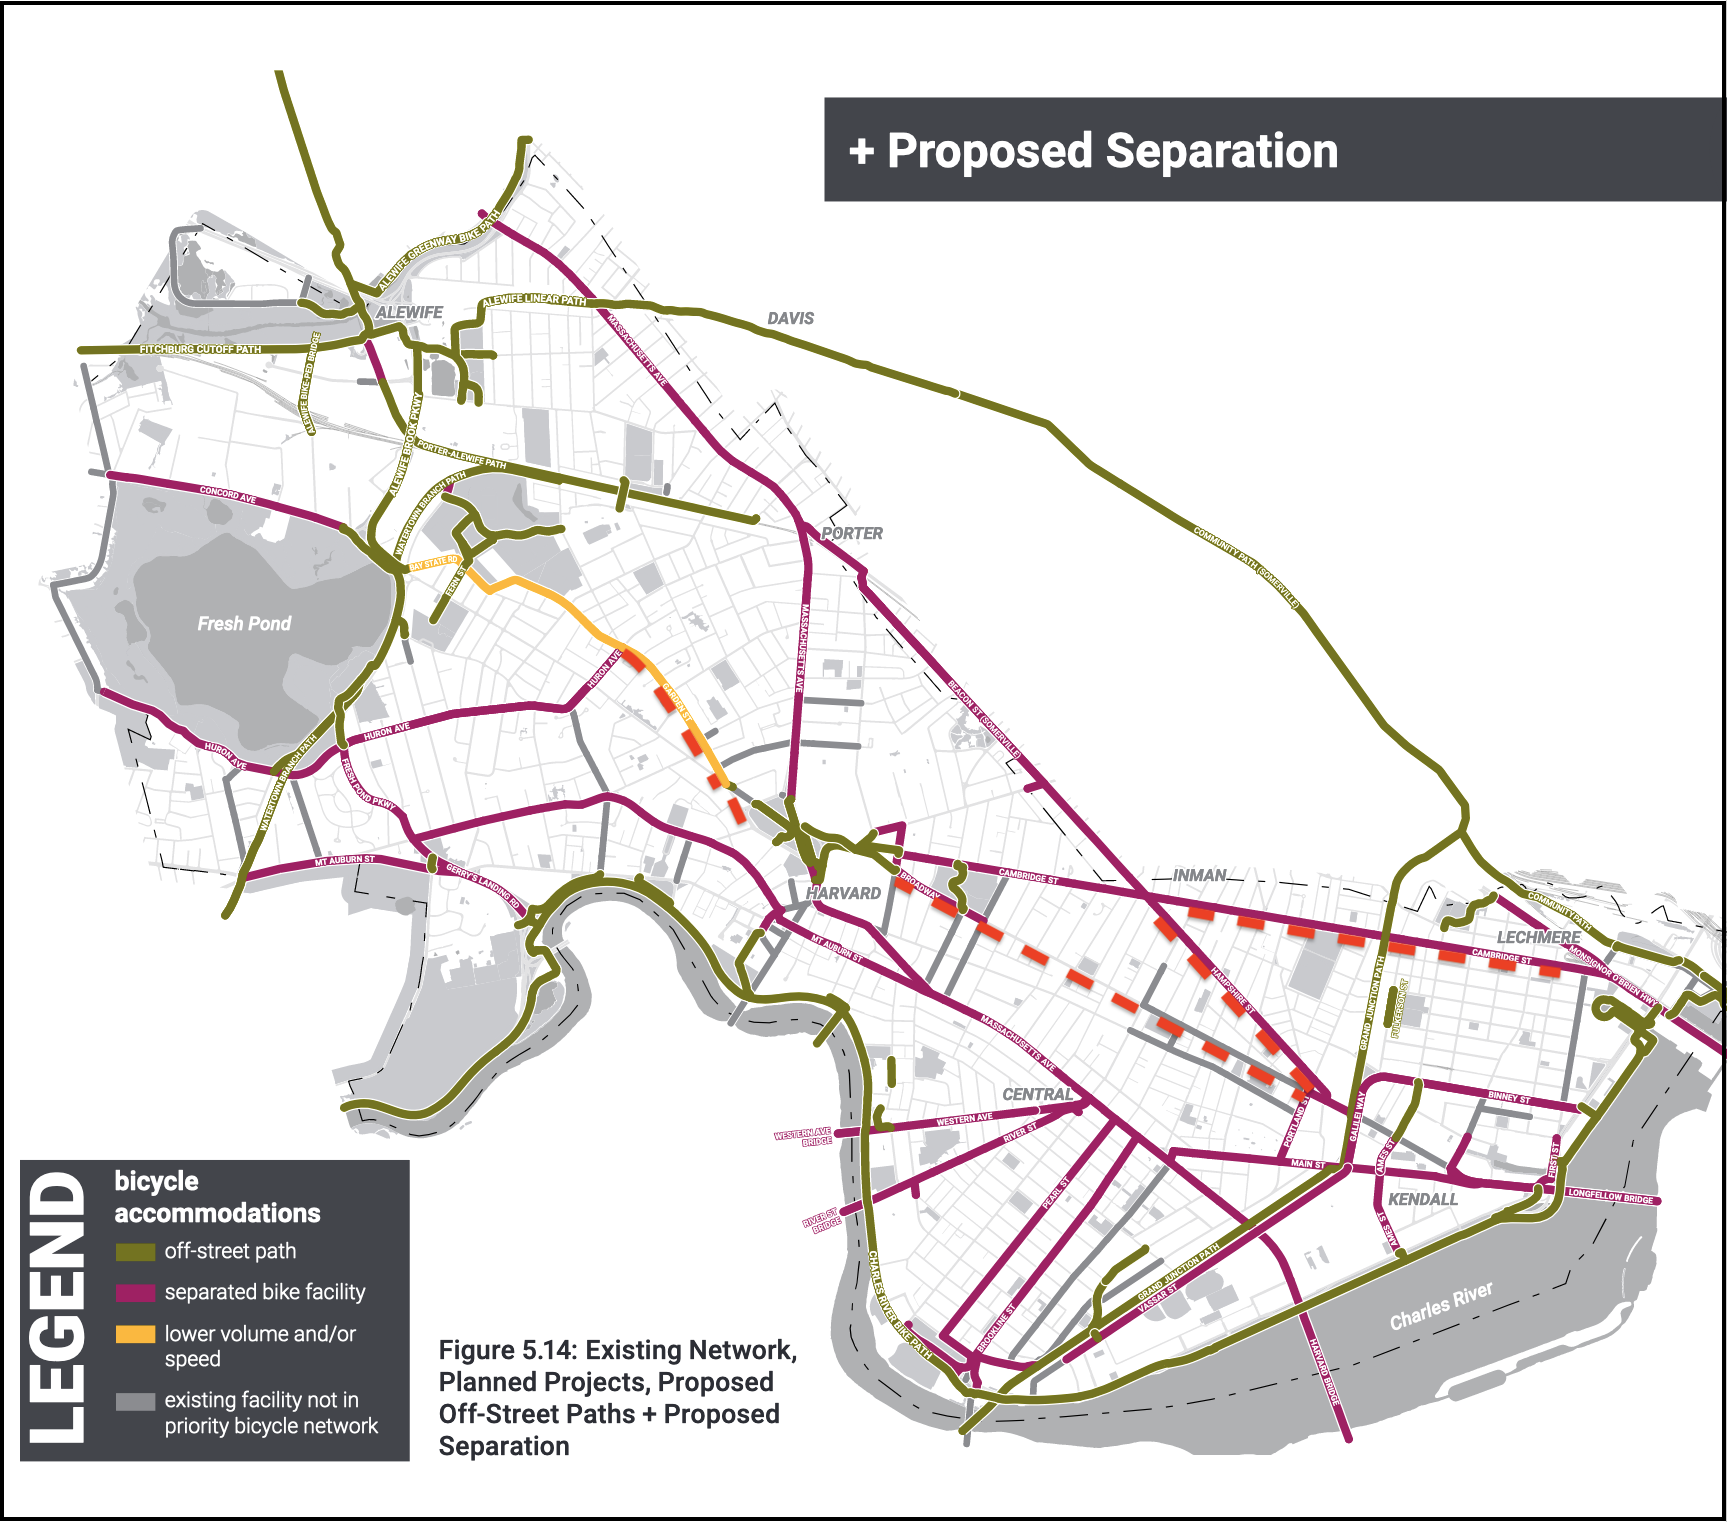 The City of Cambridge's proposed network of protected bike lanes, from its 2015 Bicycle Plan.